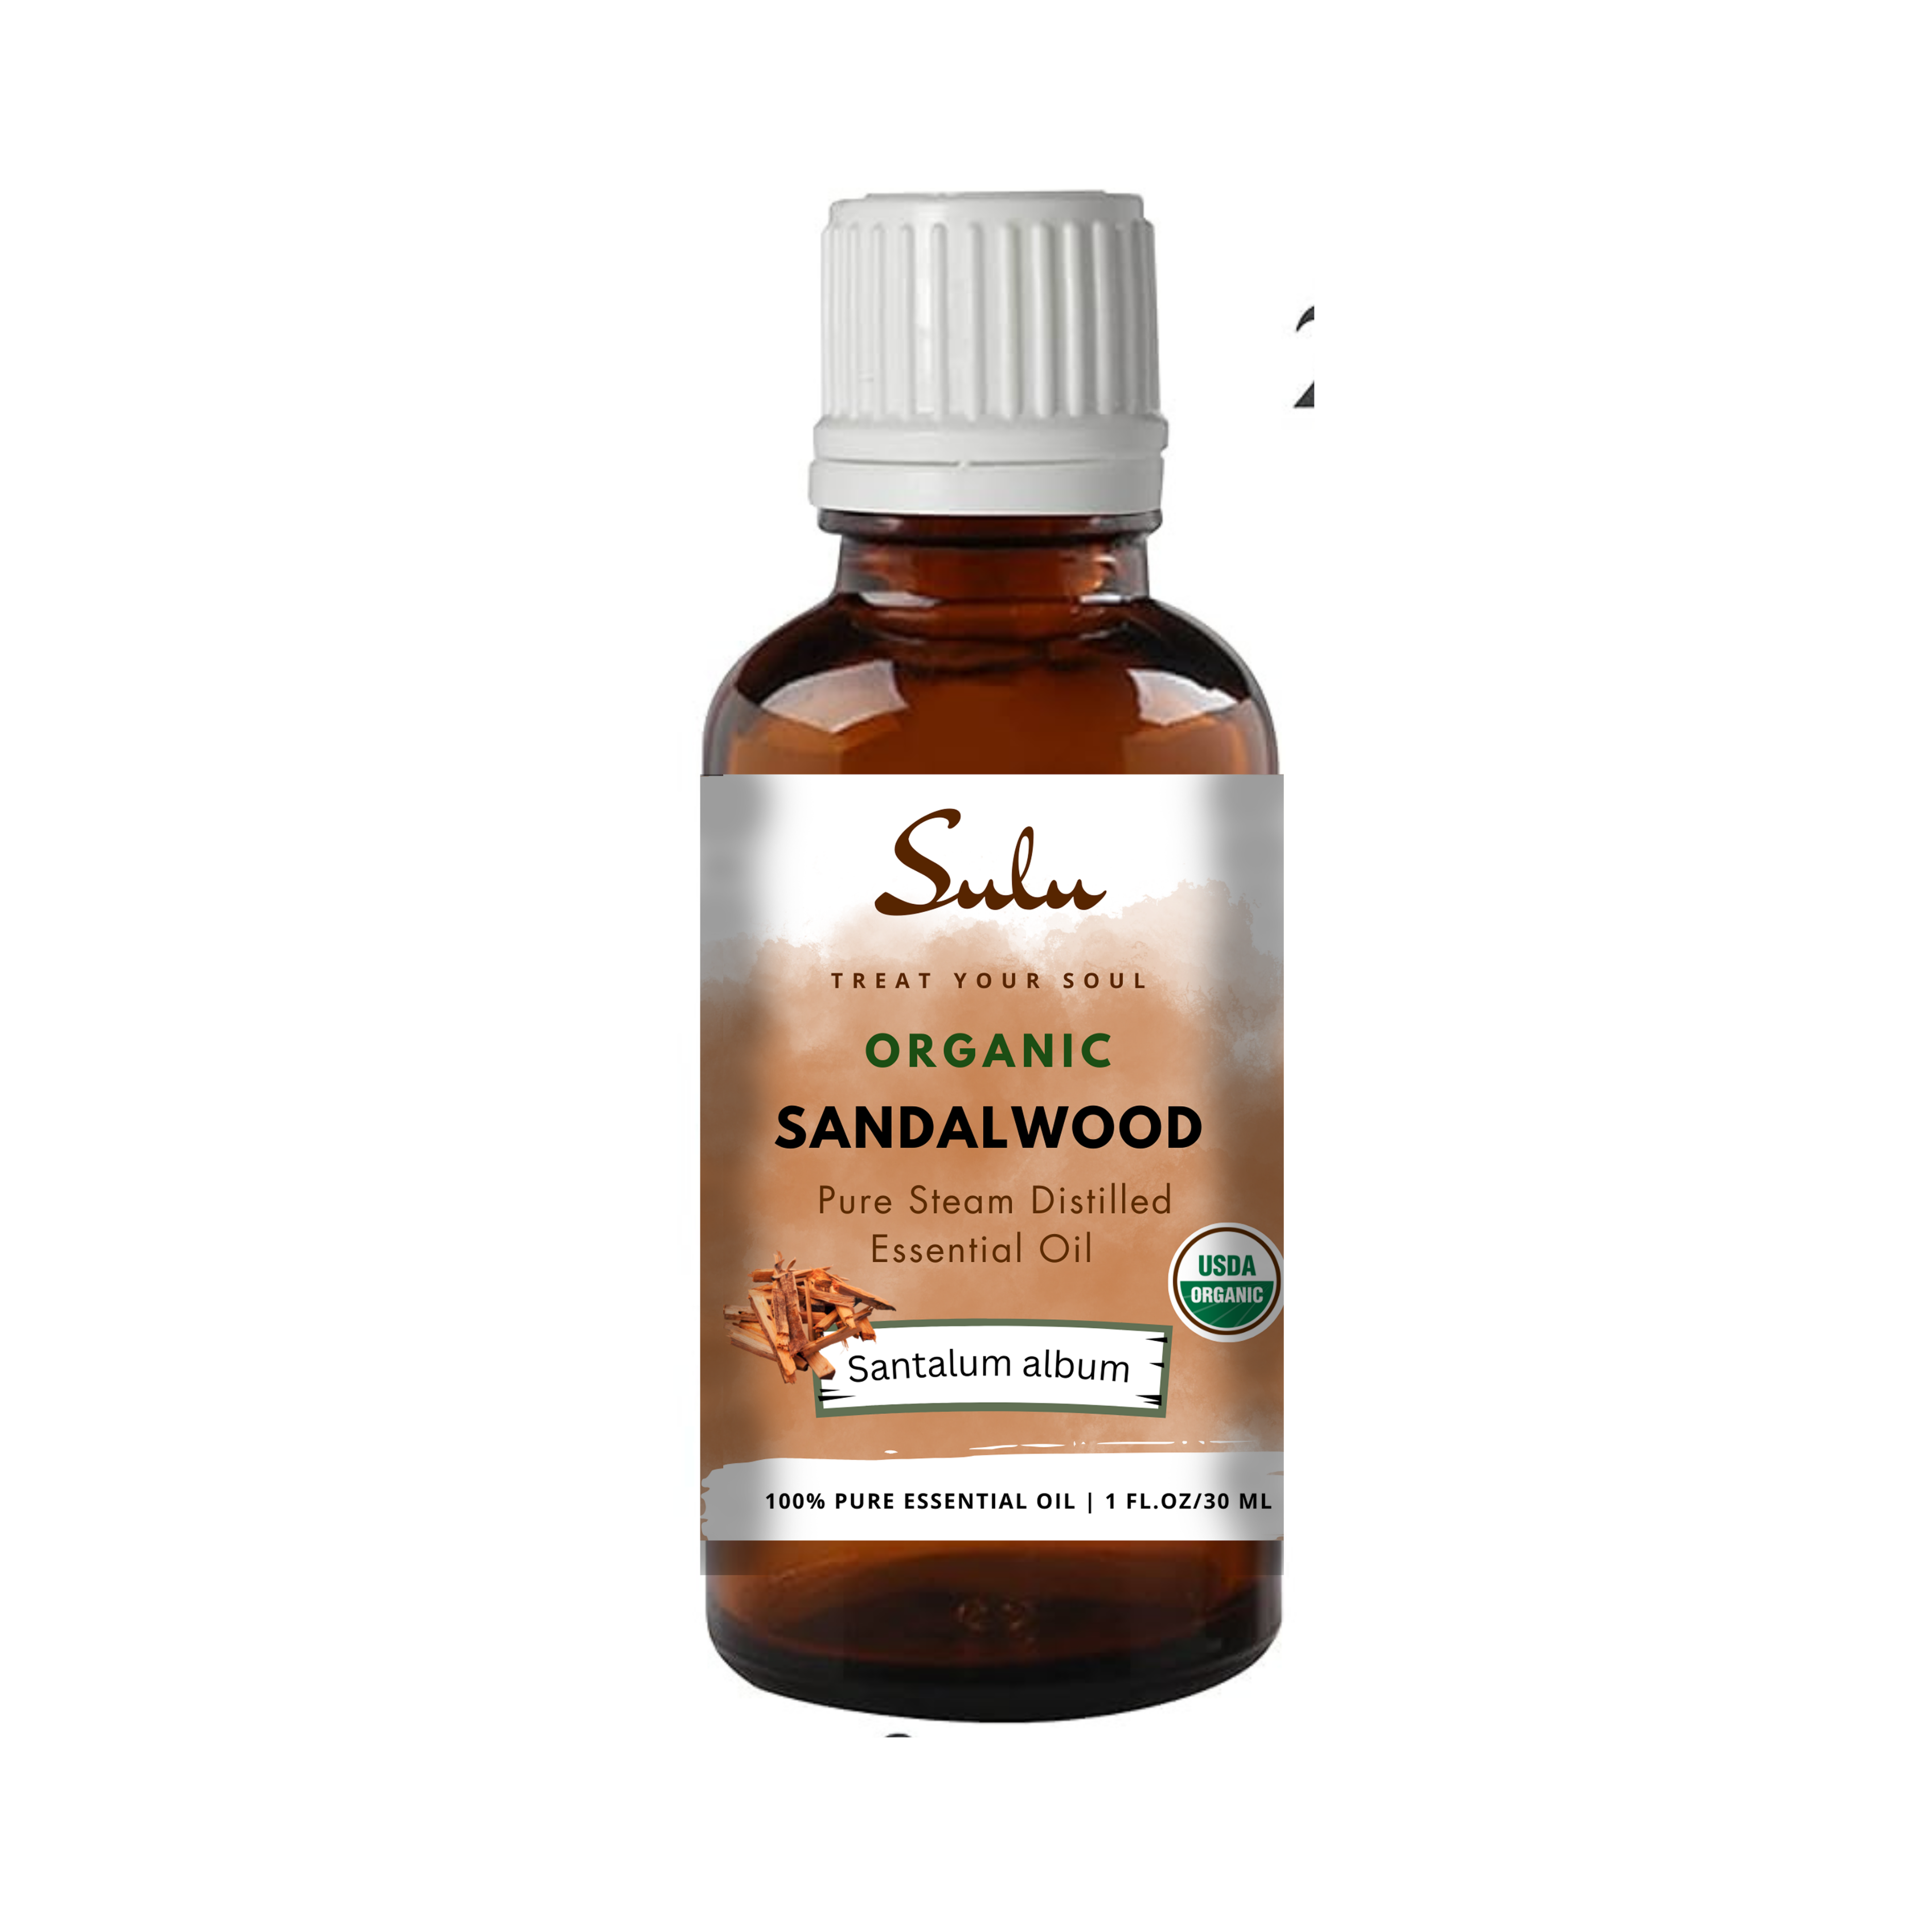 10 Benefits and Uses of Sandalwood Oil